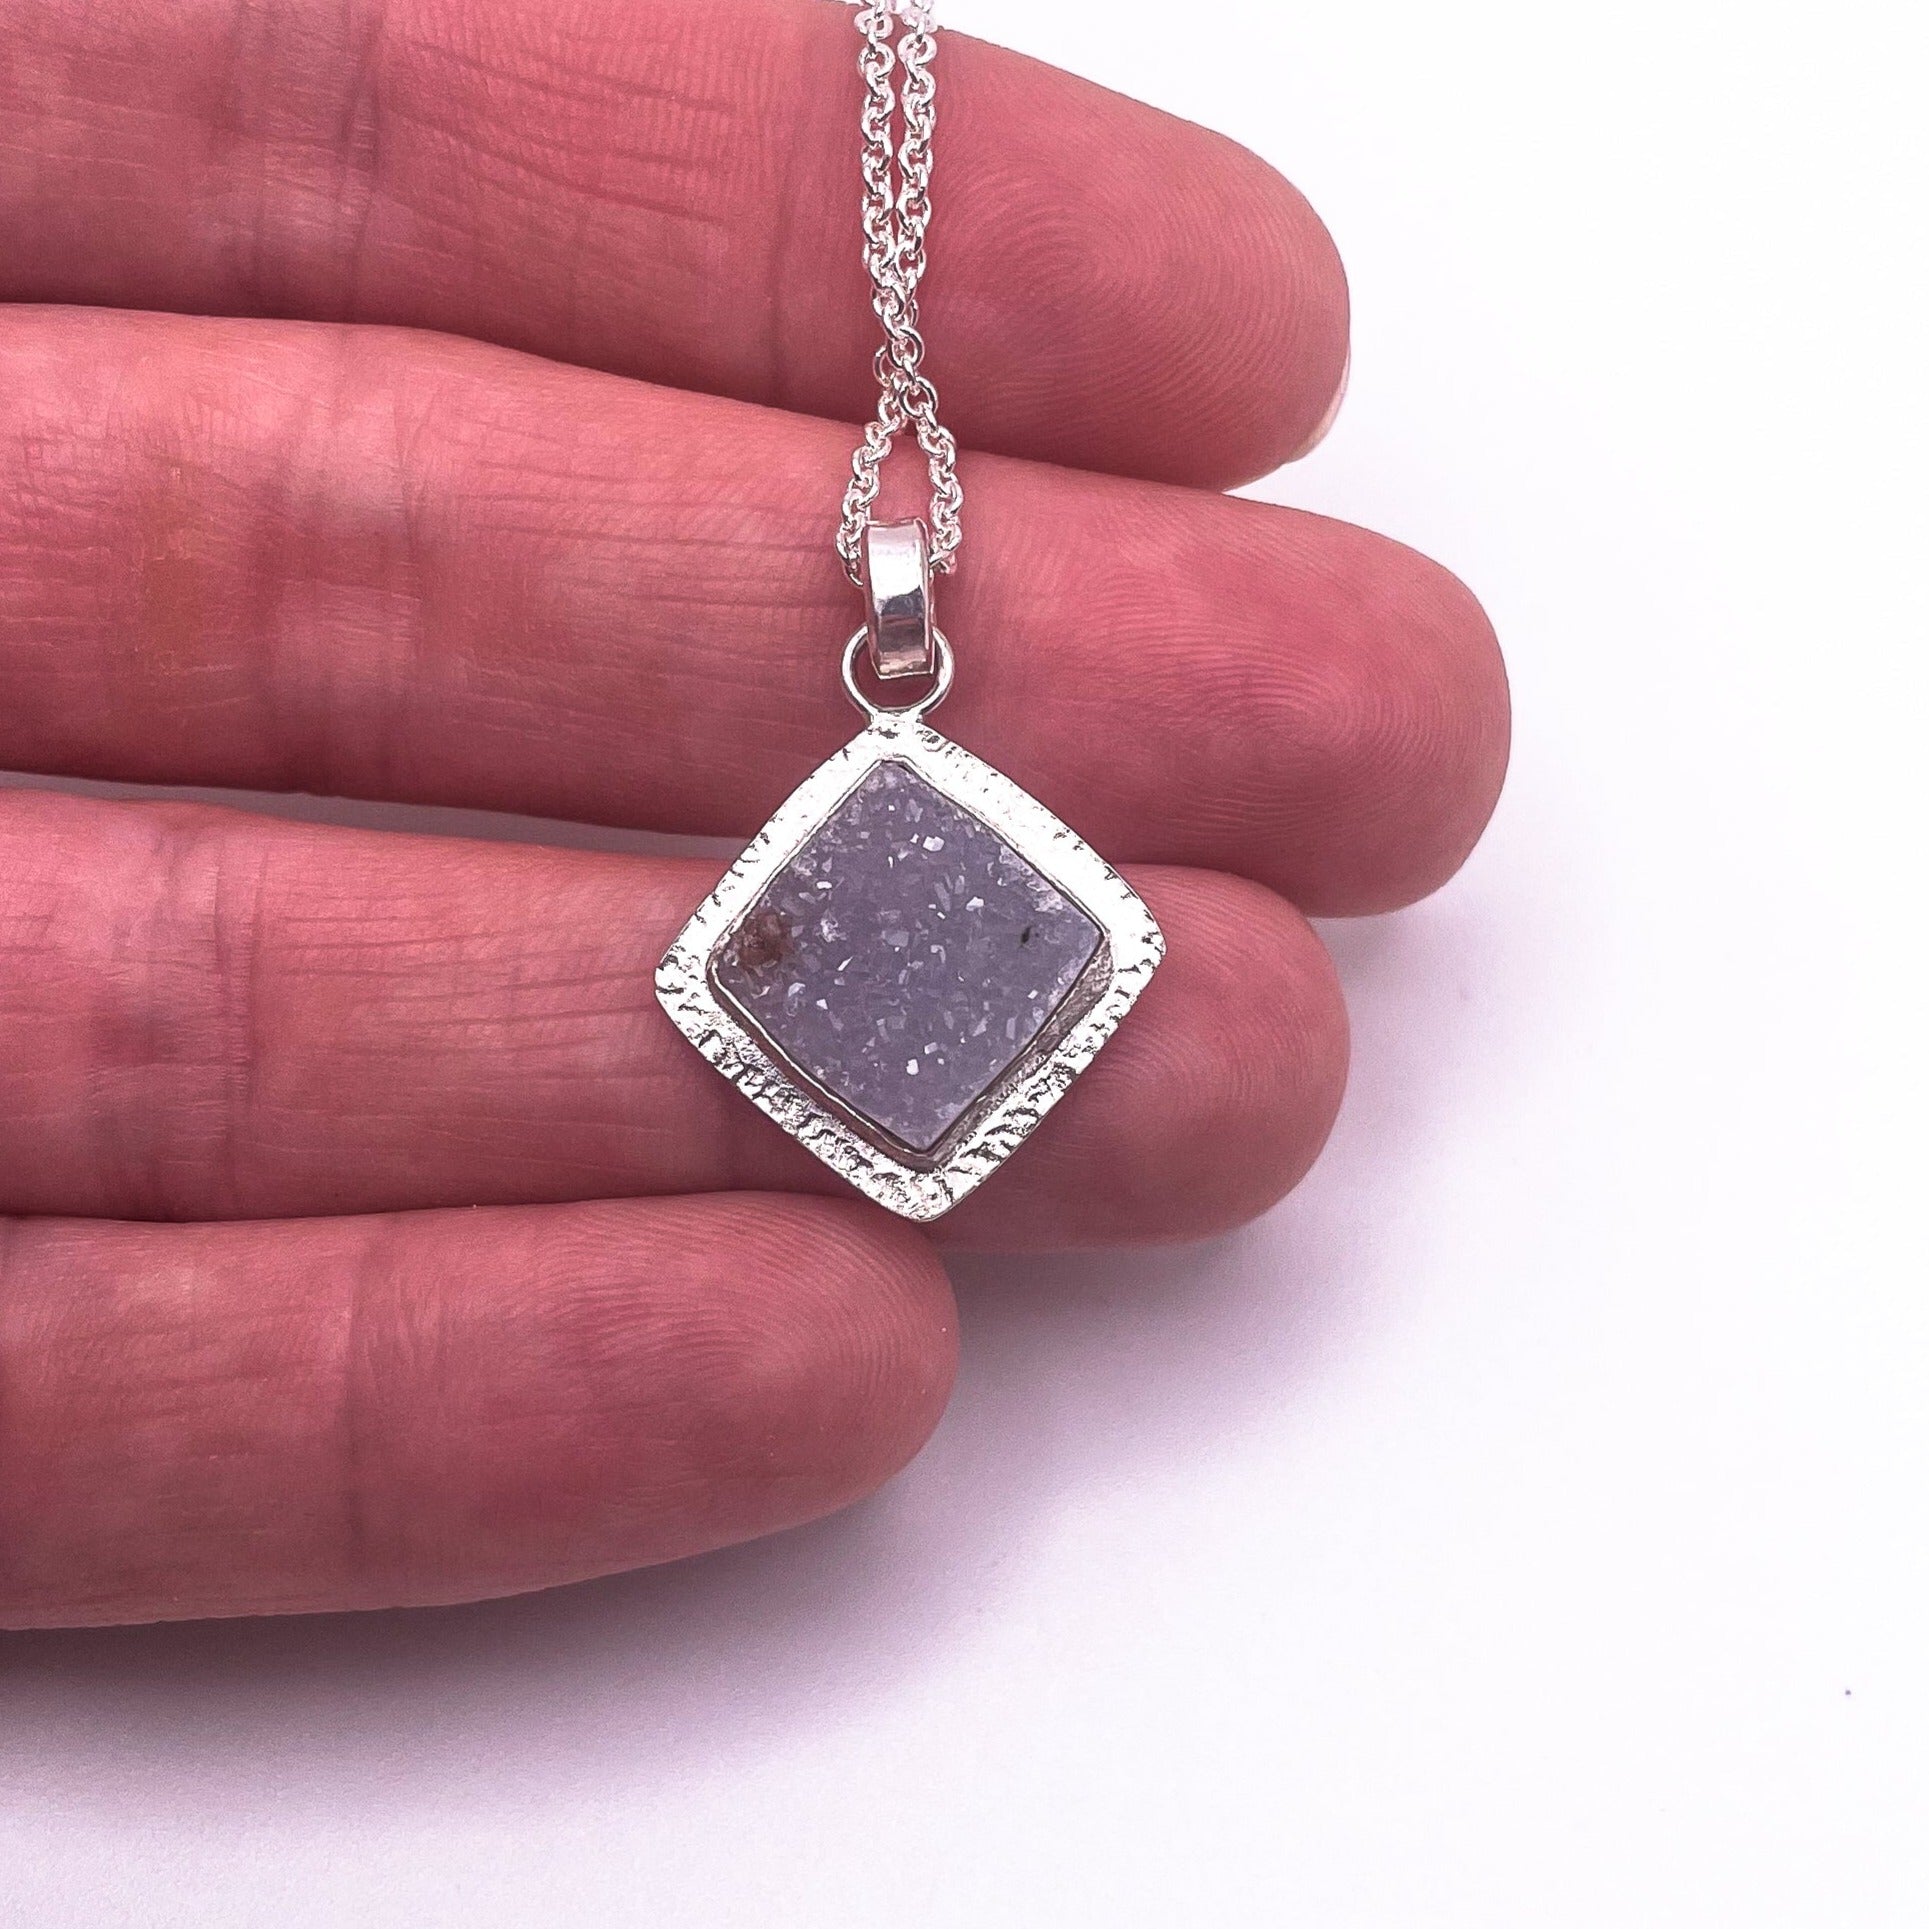 Square lavender druzy pendant necklace in sterling silver shown for scale